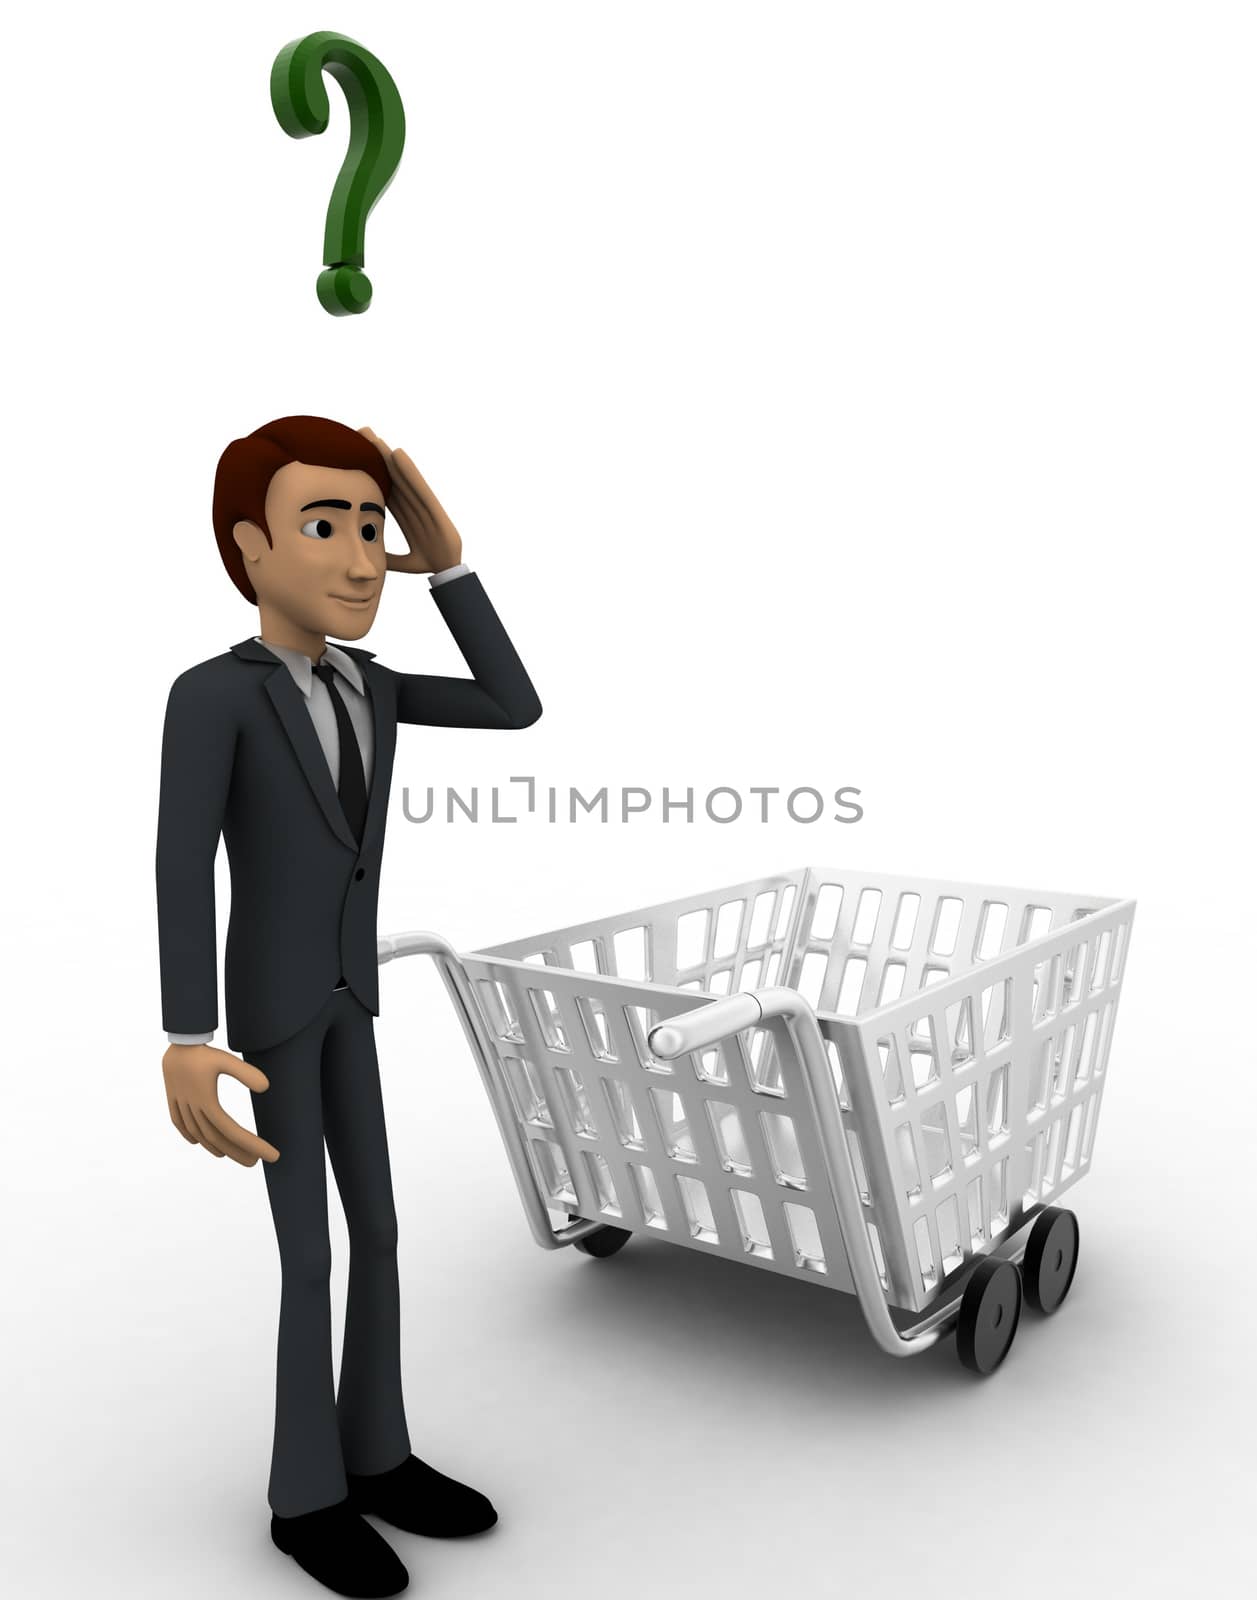 3d man confused and with cart and green question mark concept on white background, side  angle view